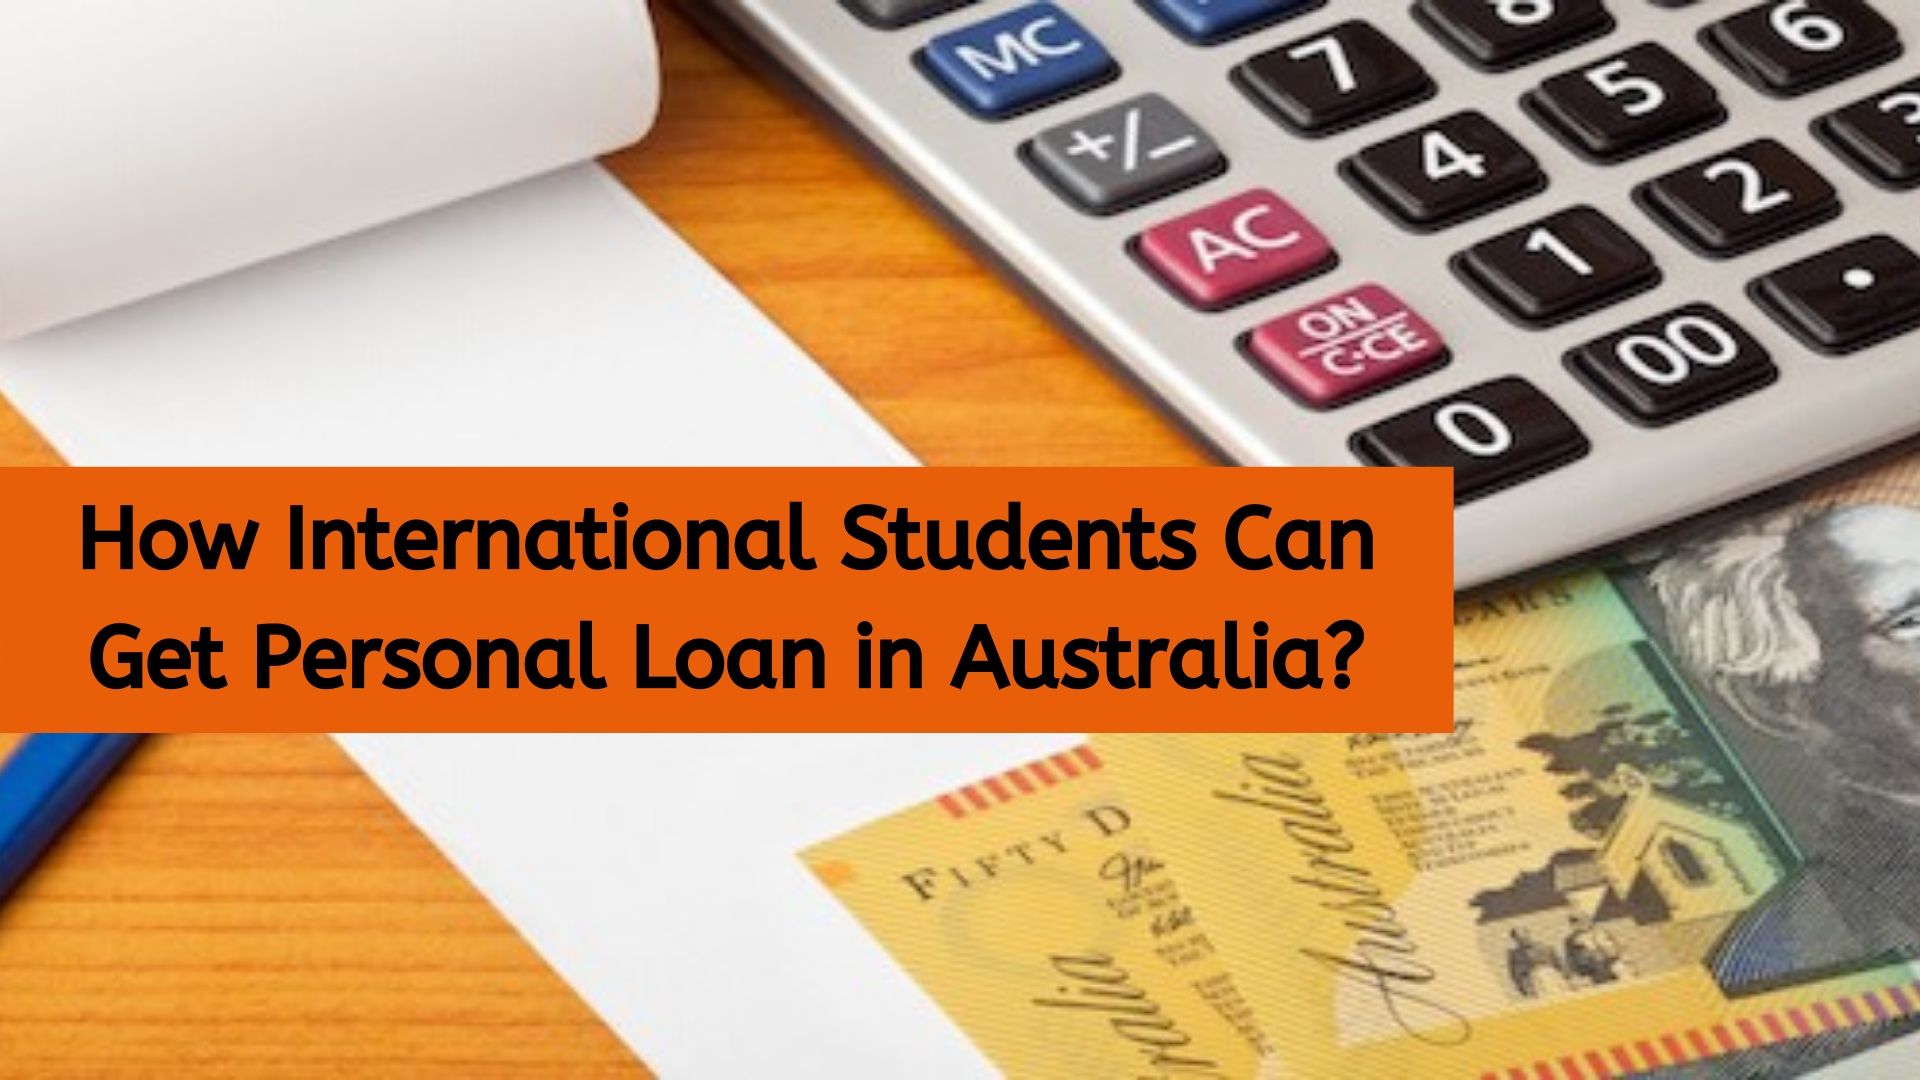 How International Students Can Get Personal Loan in Australia?